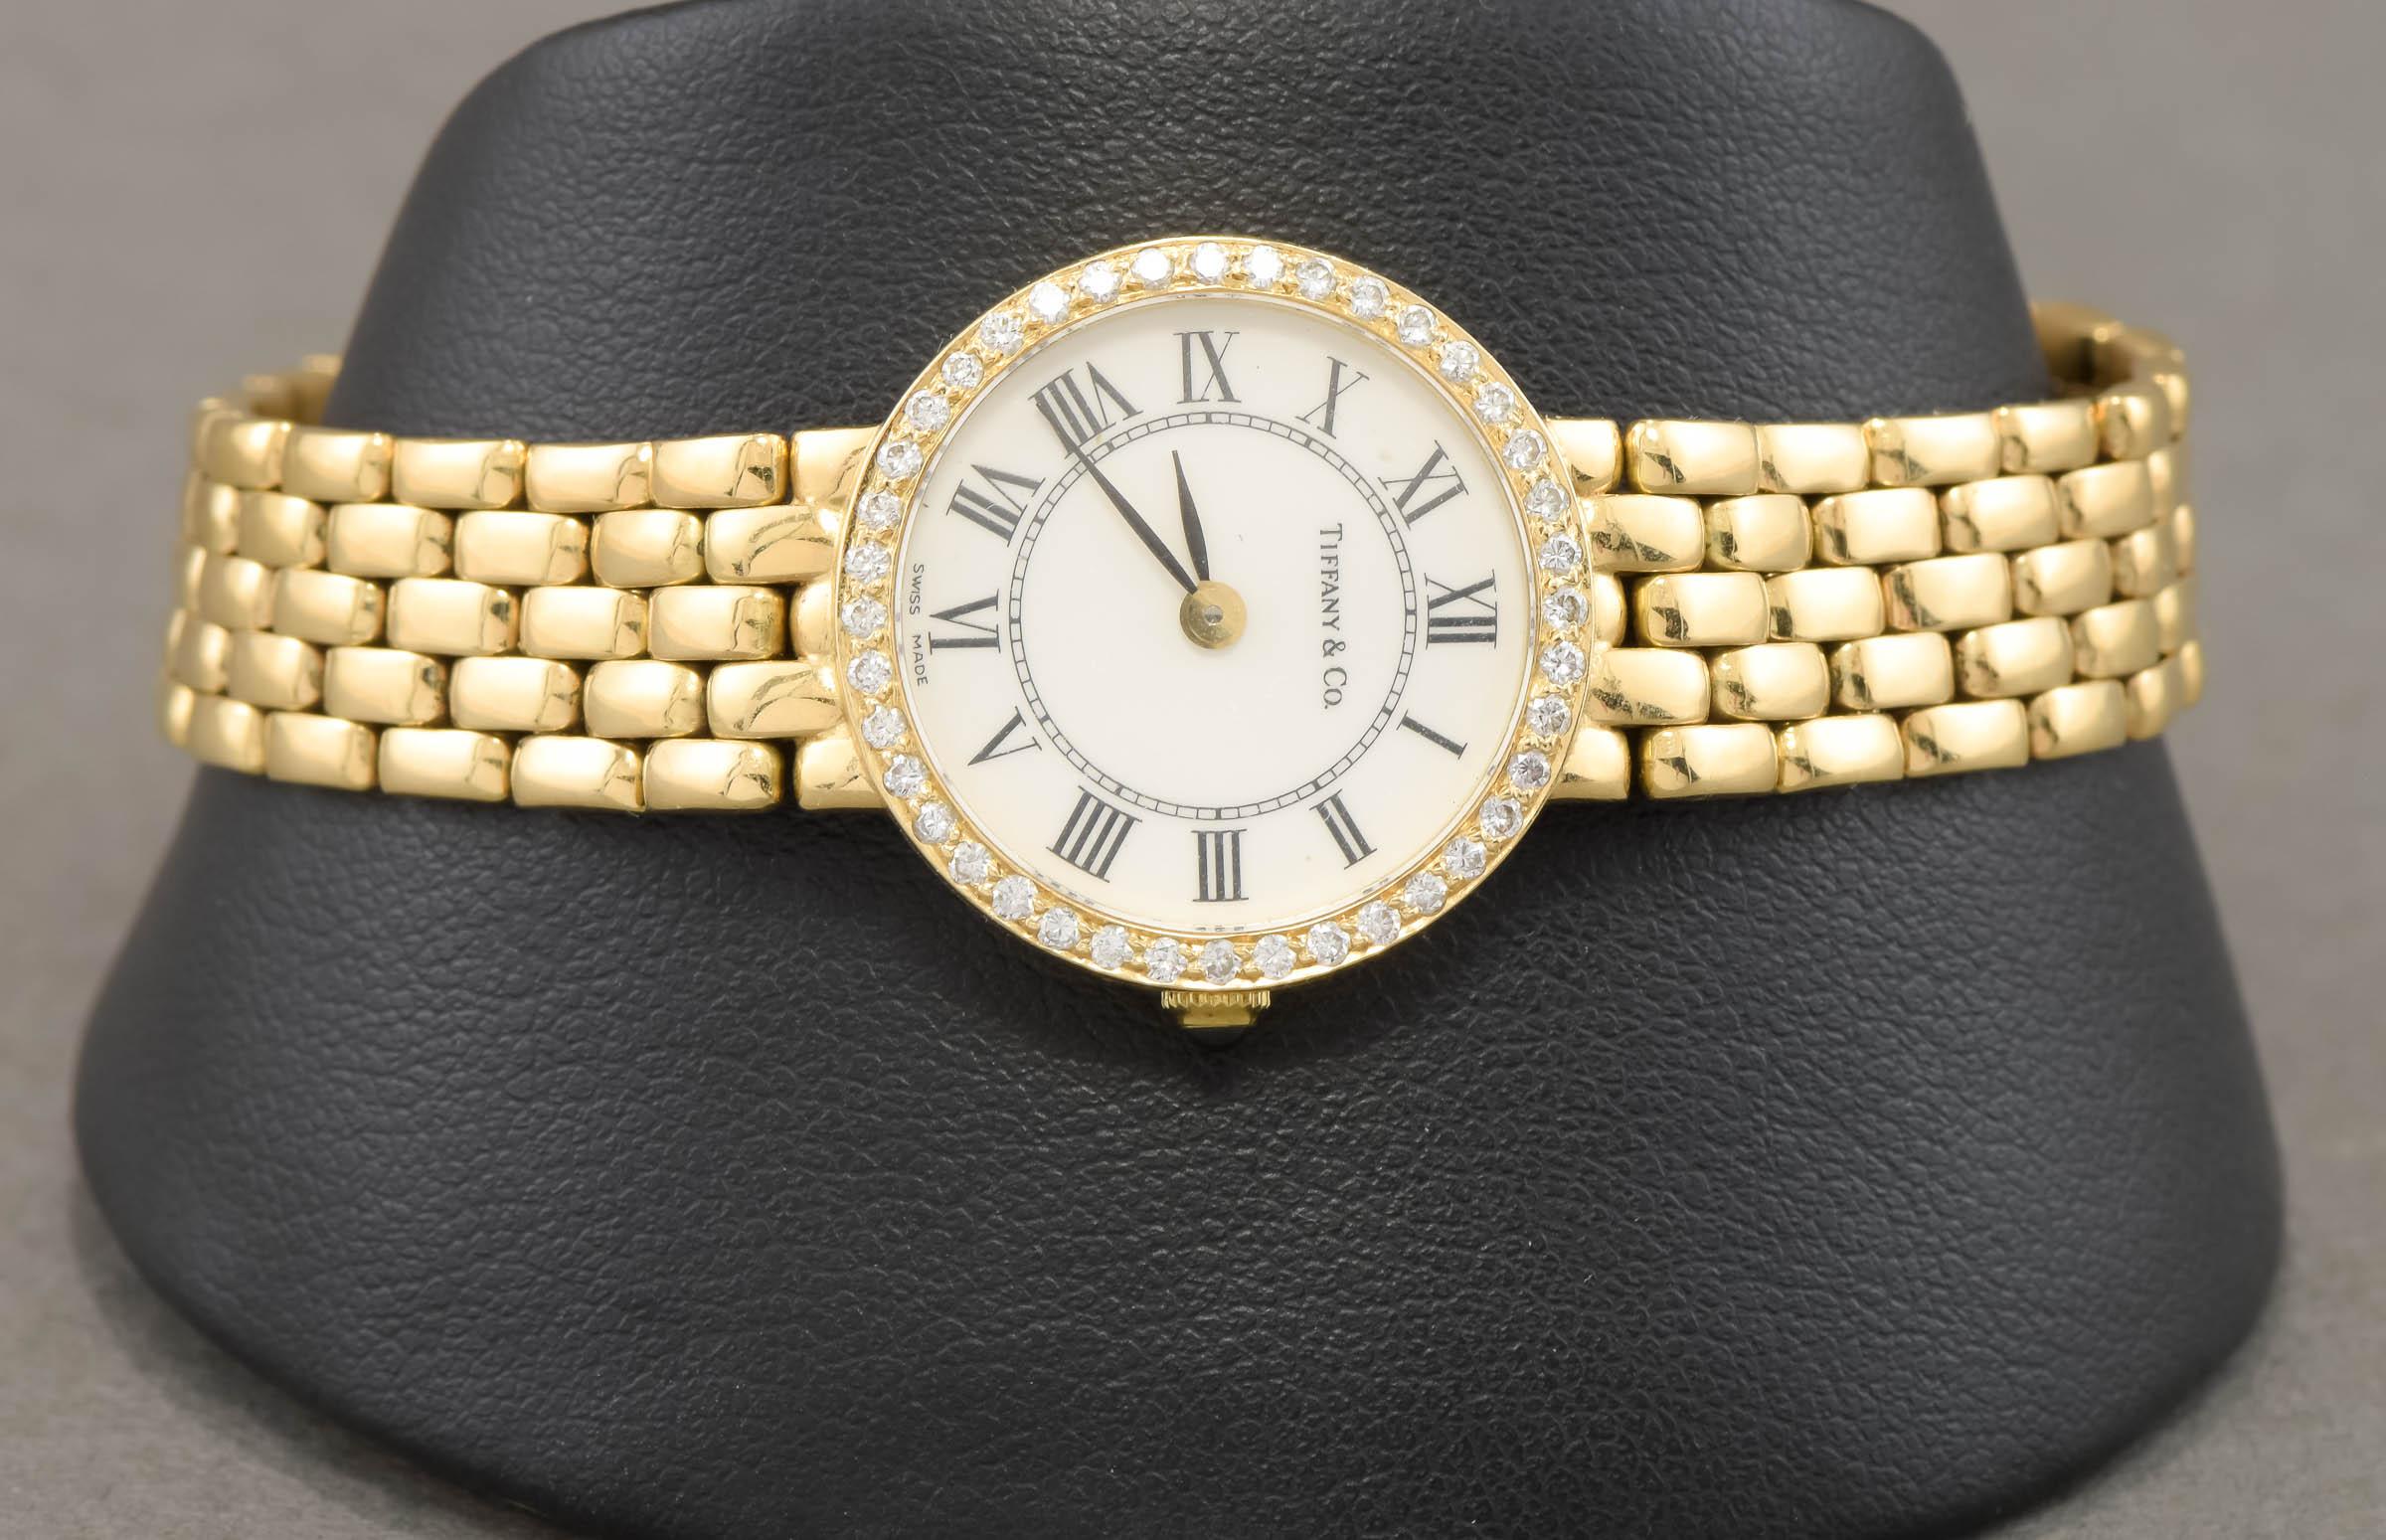 With a classic elegance, this lovely Tiffany & Co. ladies watch is versatile - perfect for both casual and dressy occasions. It's keeping perfect time so is ready to wear and enjoy.

The case and cobblestone style bracelet is made of 14K yellow